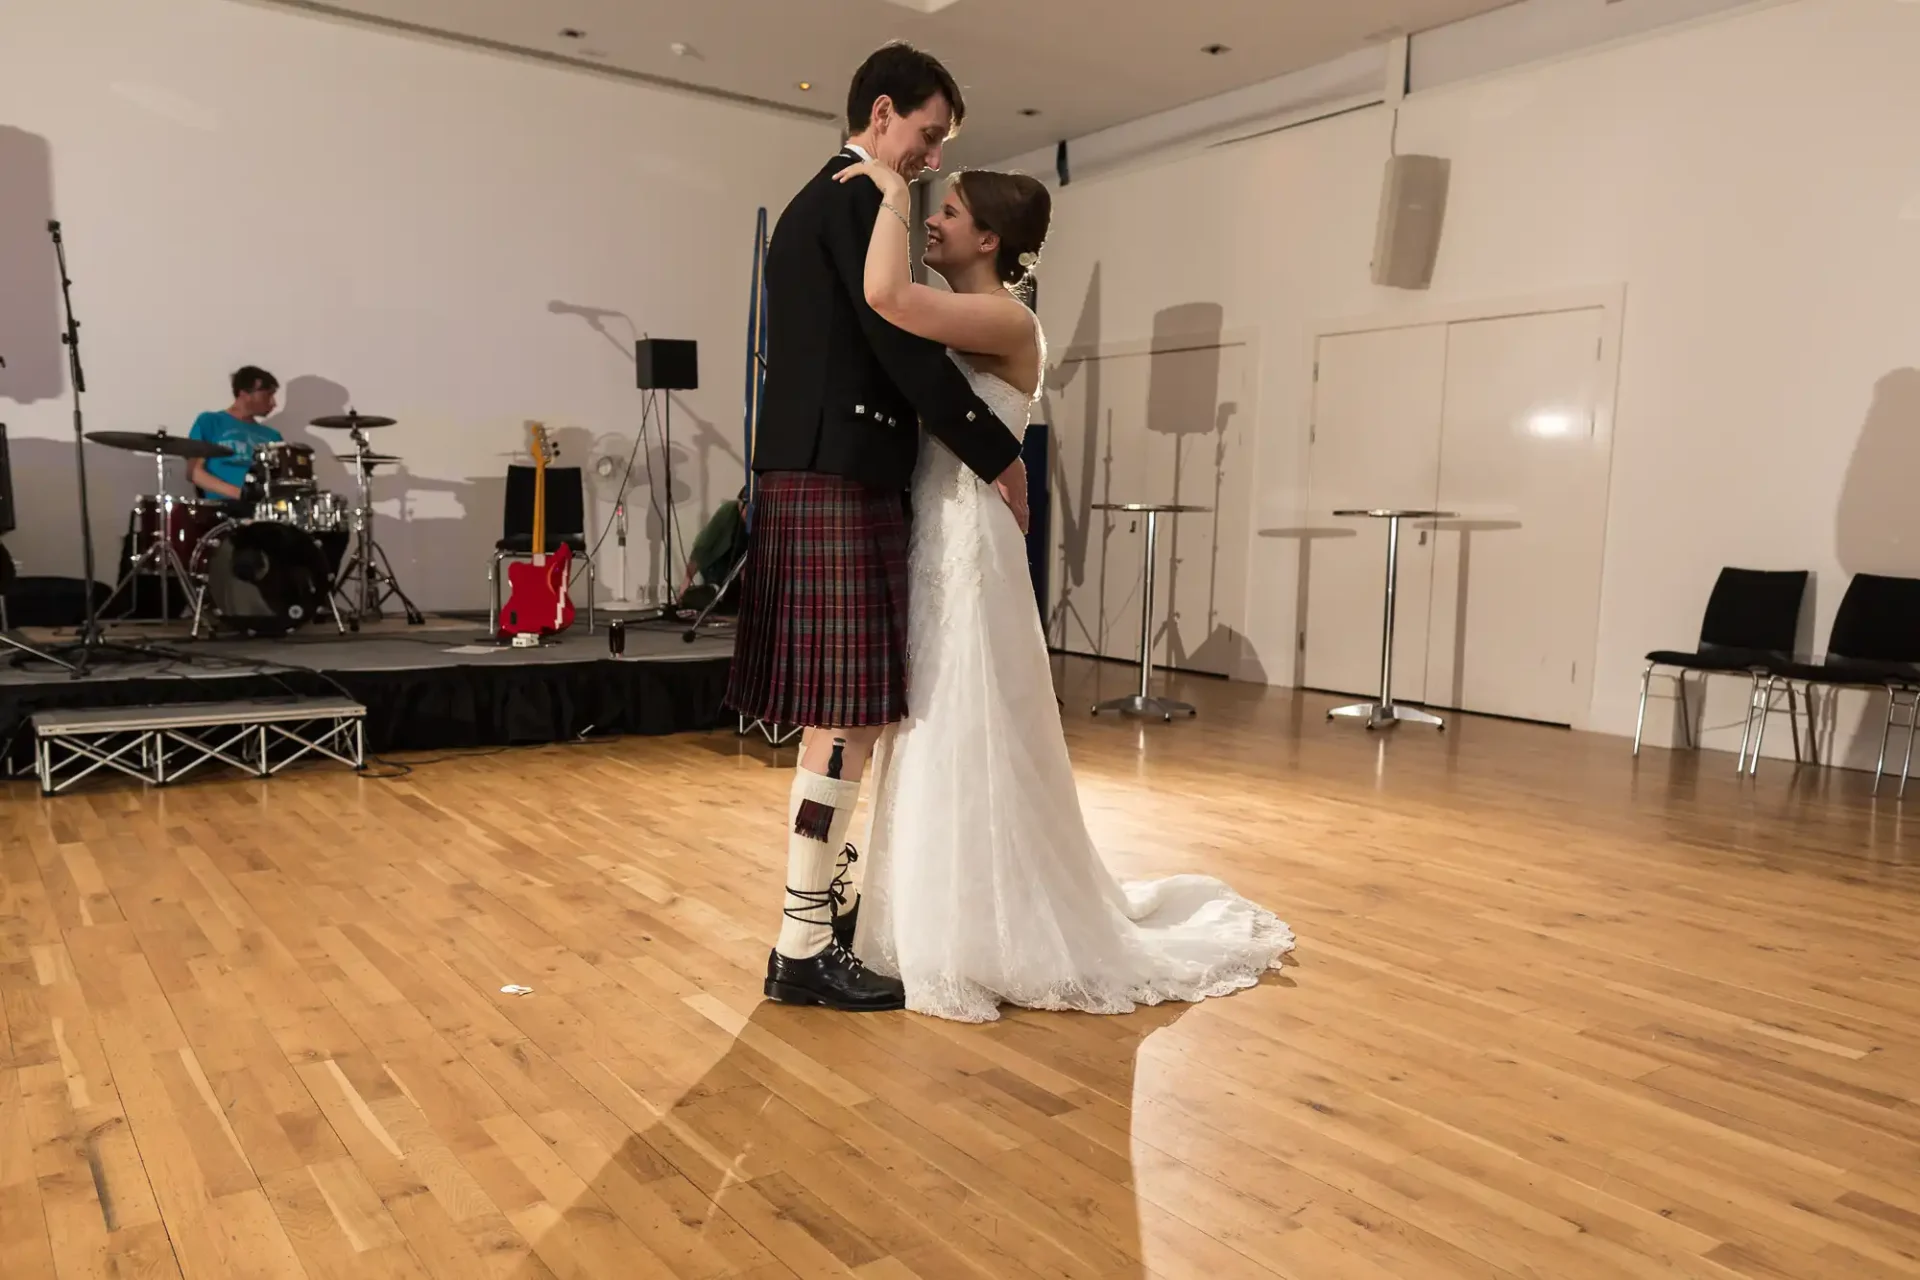 A bride and groom in a dance pose during their wedding reception; the groom is wearing a kilt, and a drummer is visible in the background.